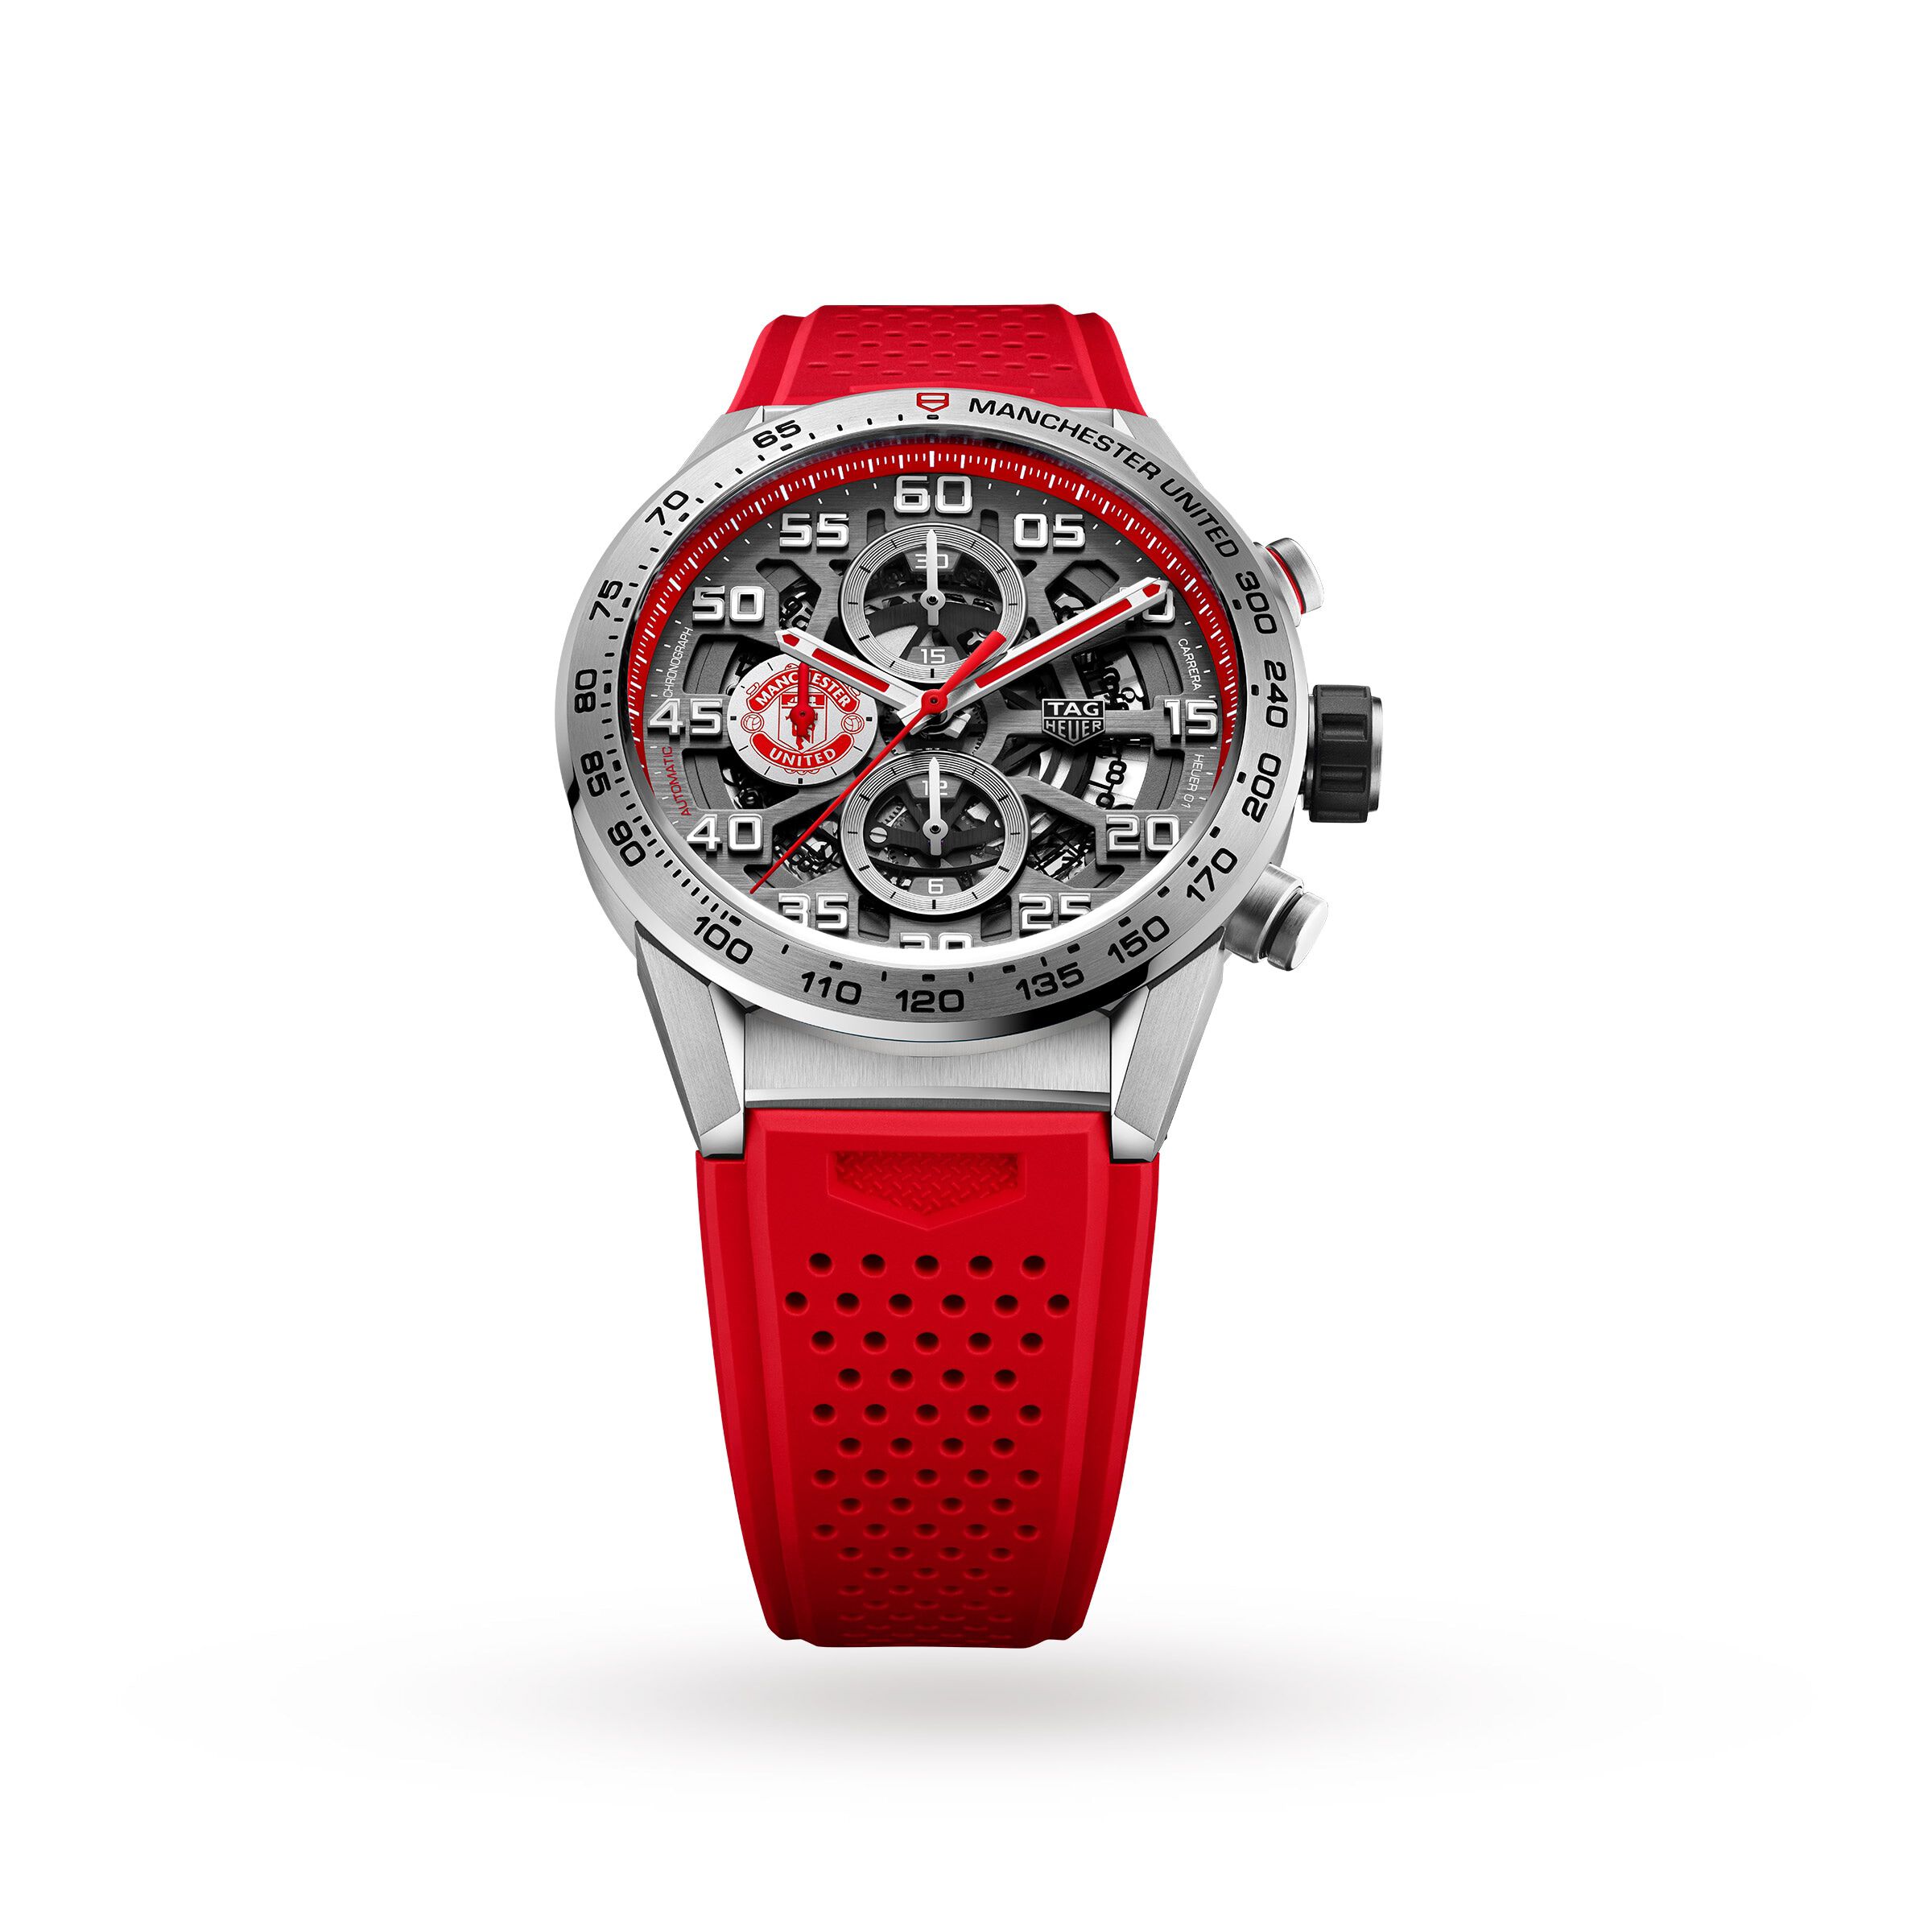  Tag Heuer Carrera Manchester United Special Edition